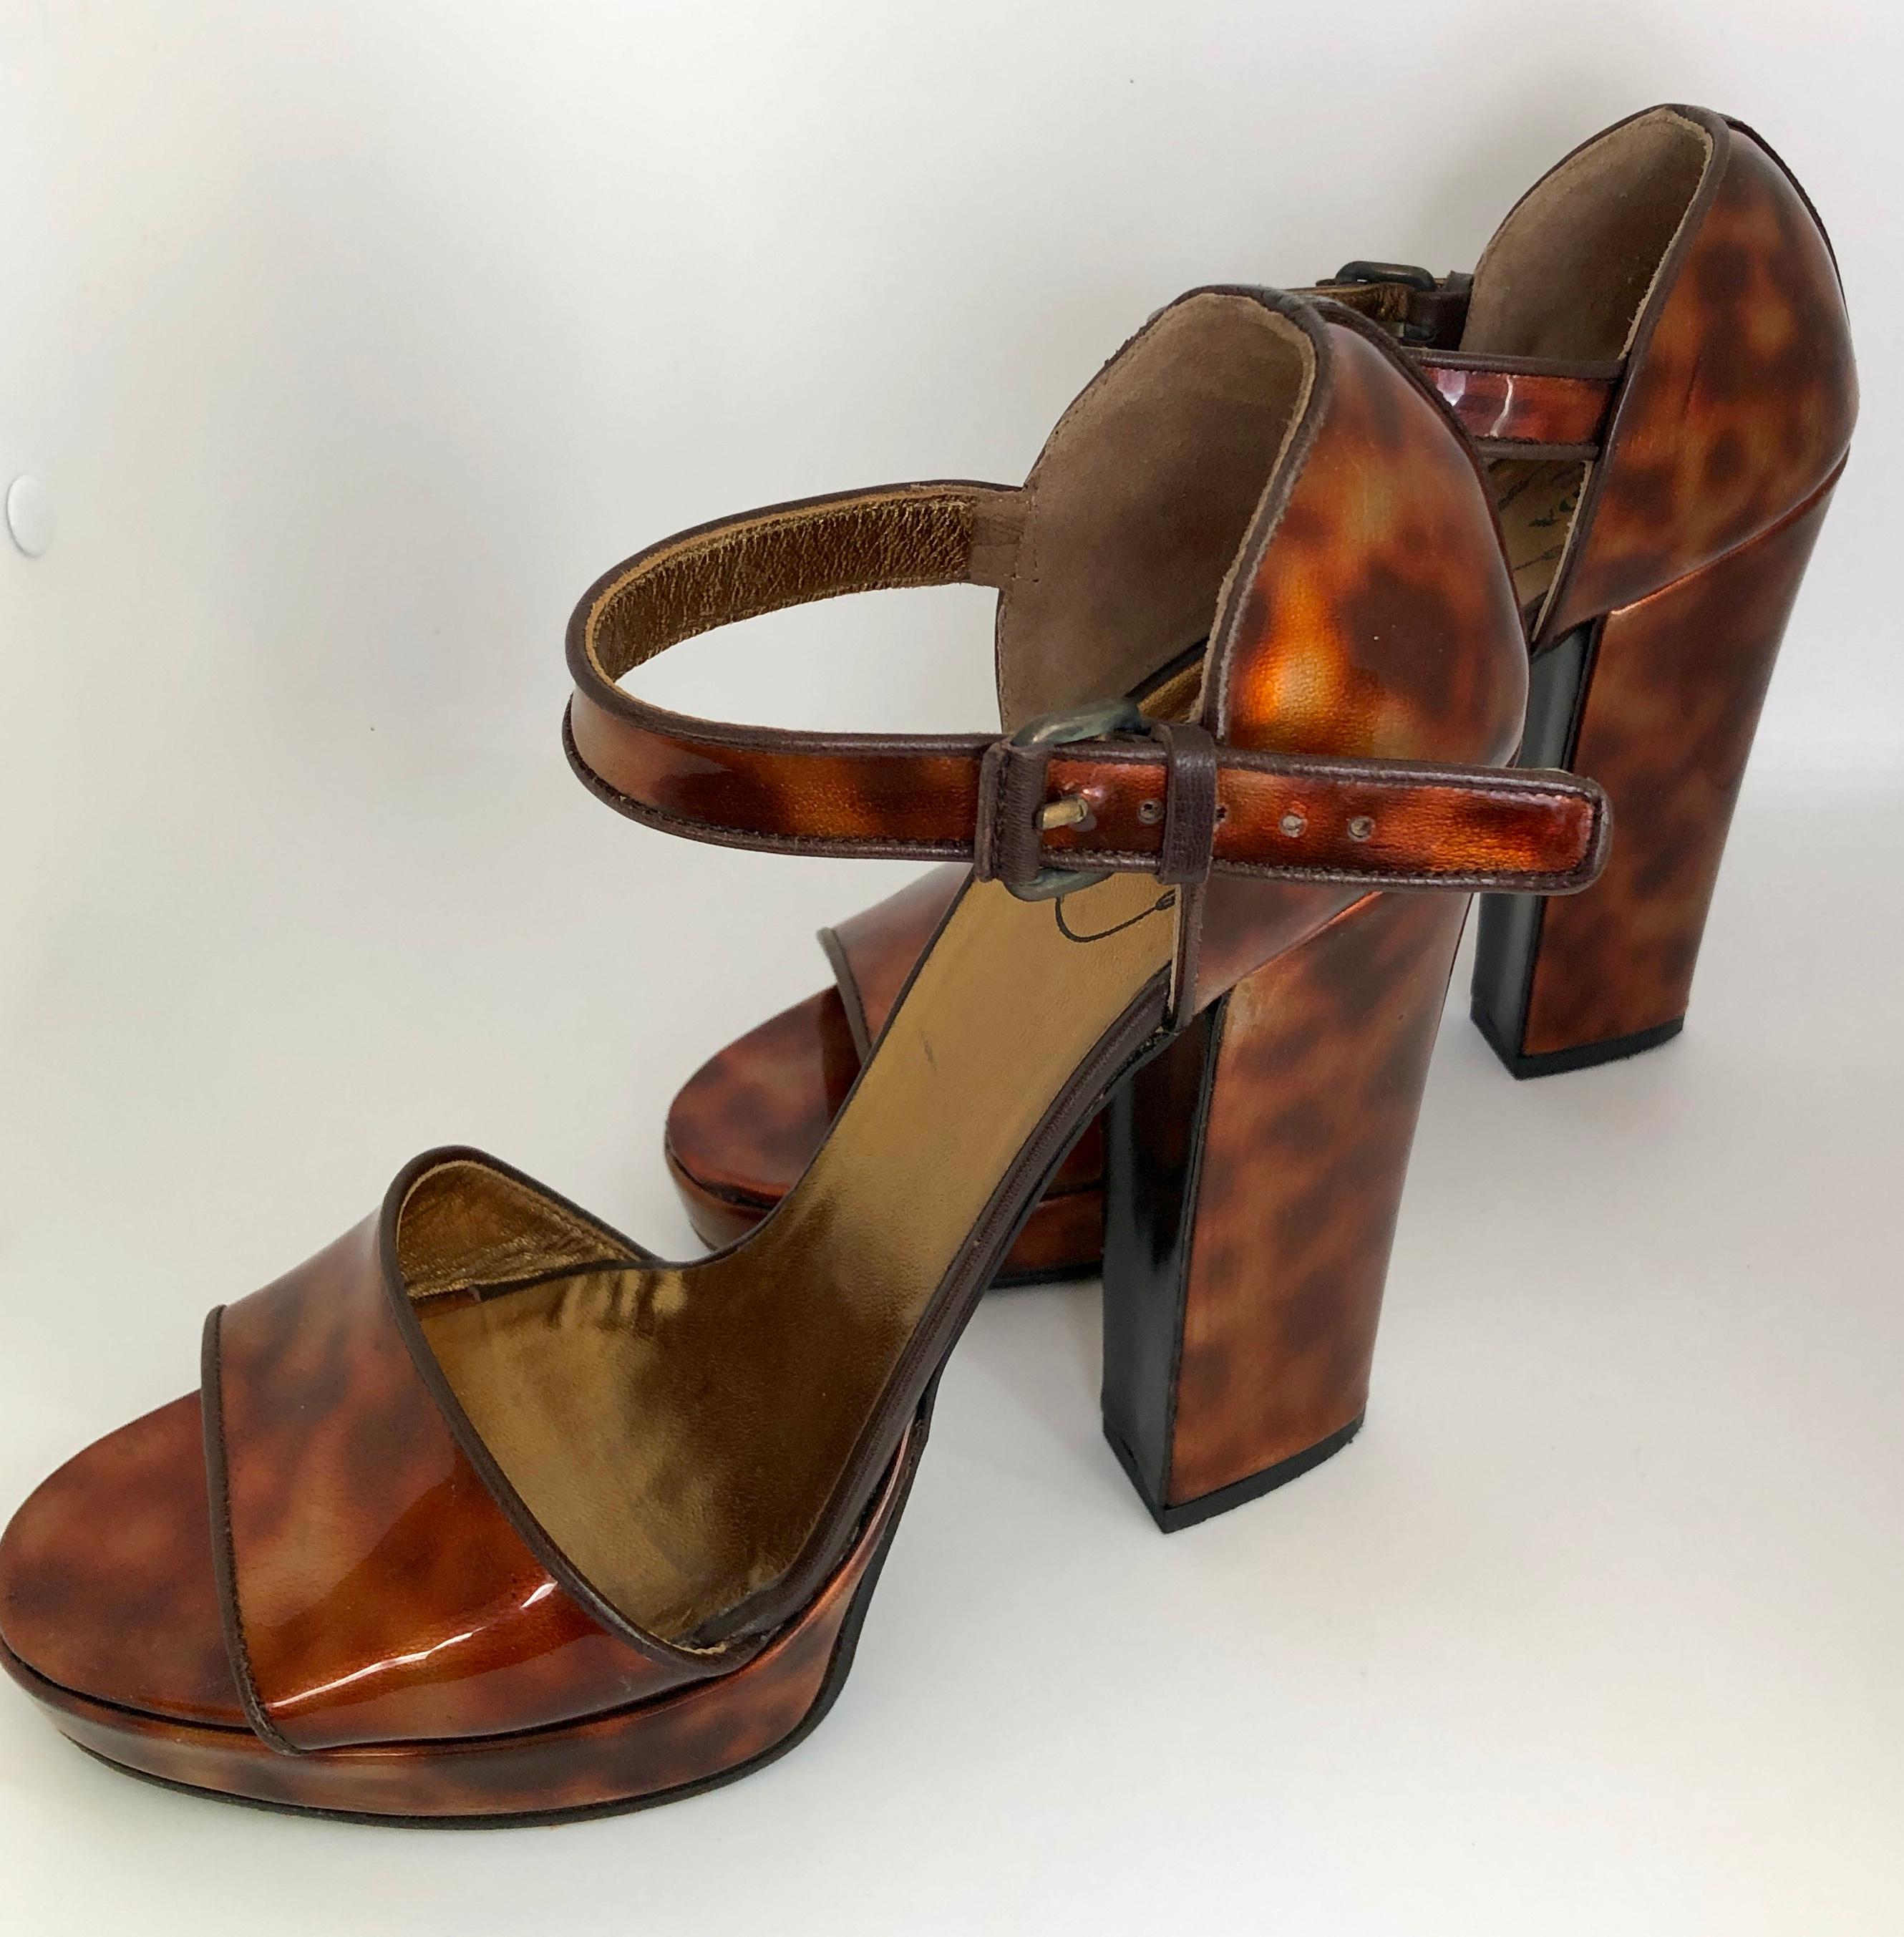 Offered is a pair of Miuccia Prada brown and gold faux tortoiseshell sky high block heel platform ankle strap with buckle sandals.  The heel of the sandal is covered and attached to the ankle strap and buckle with a wide strap over the toe.  